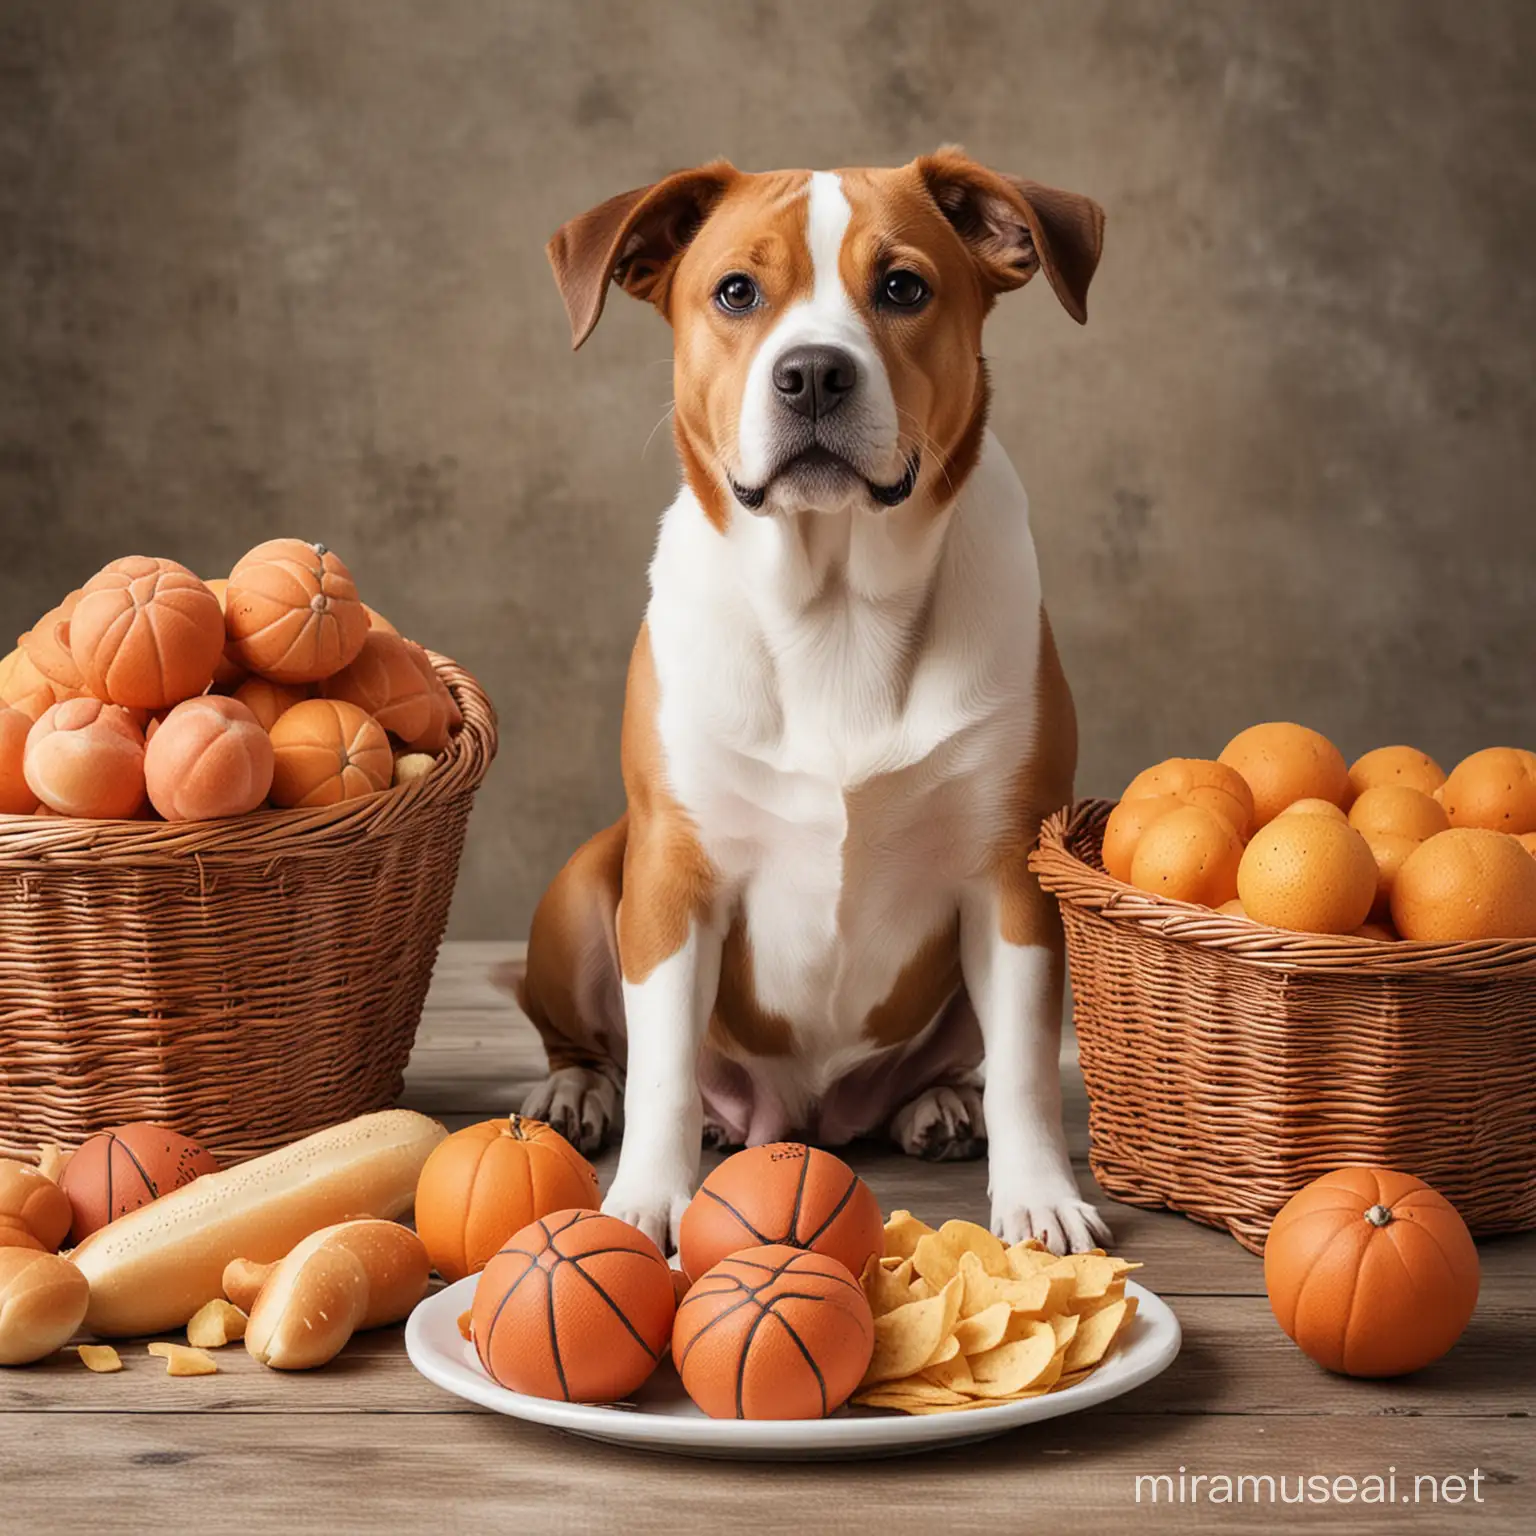 CREATE A PIC WITH BASKET BALL, FOOD AND DOG